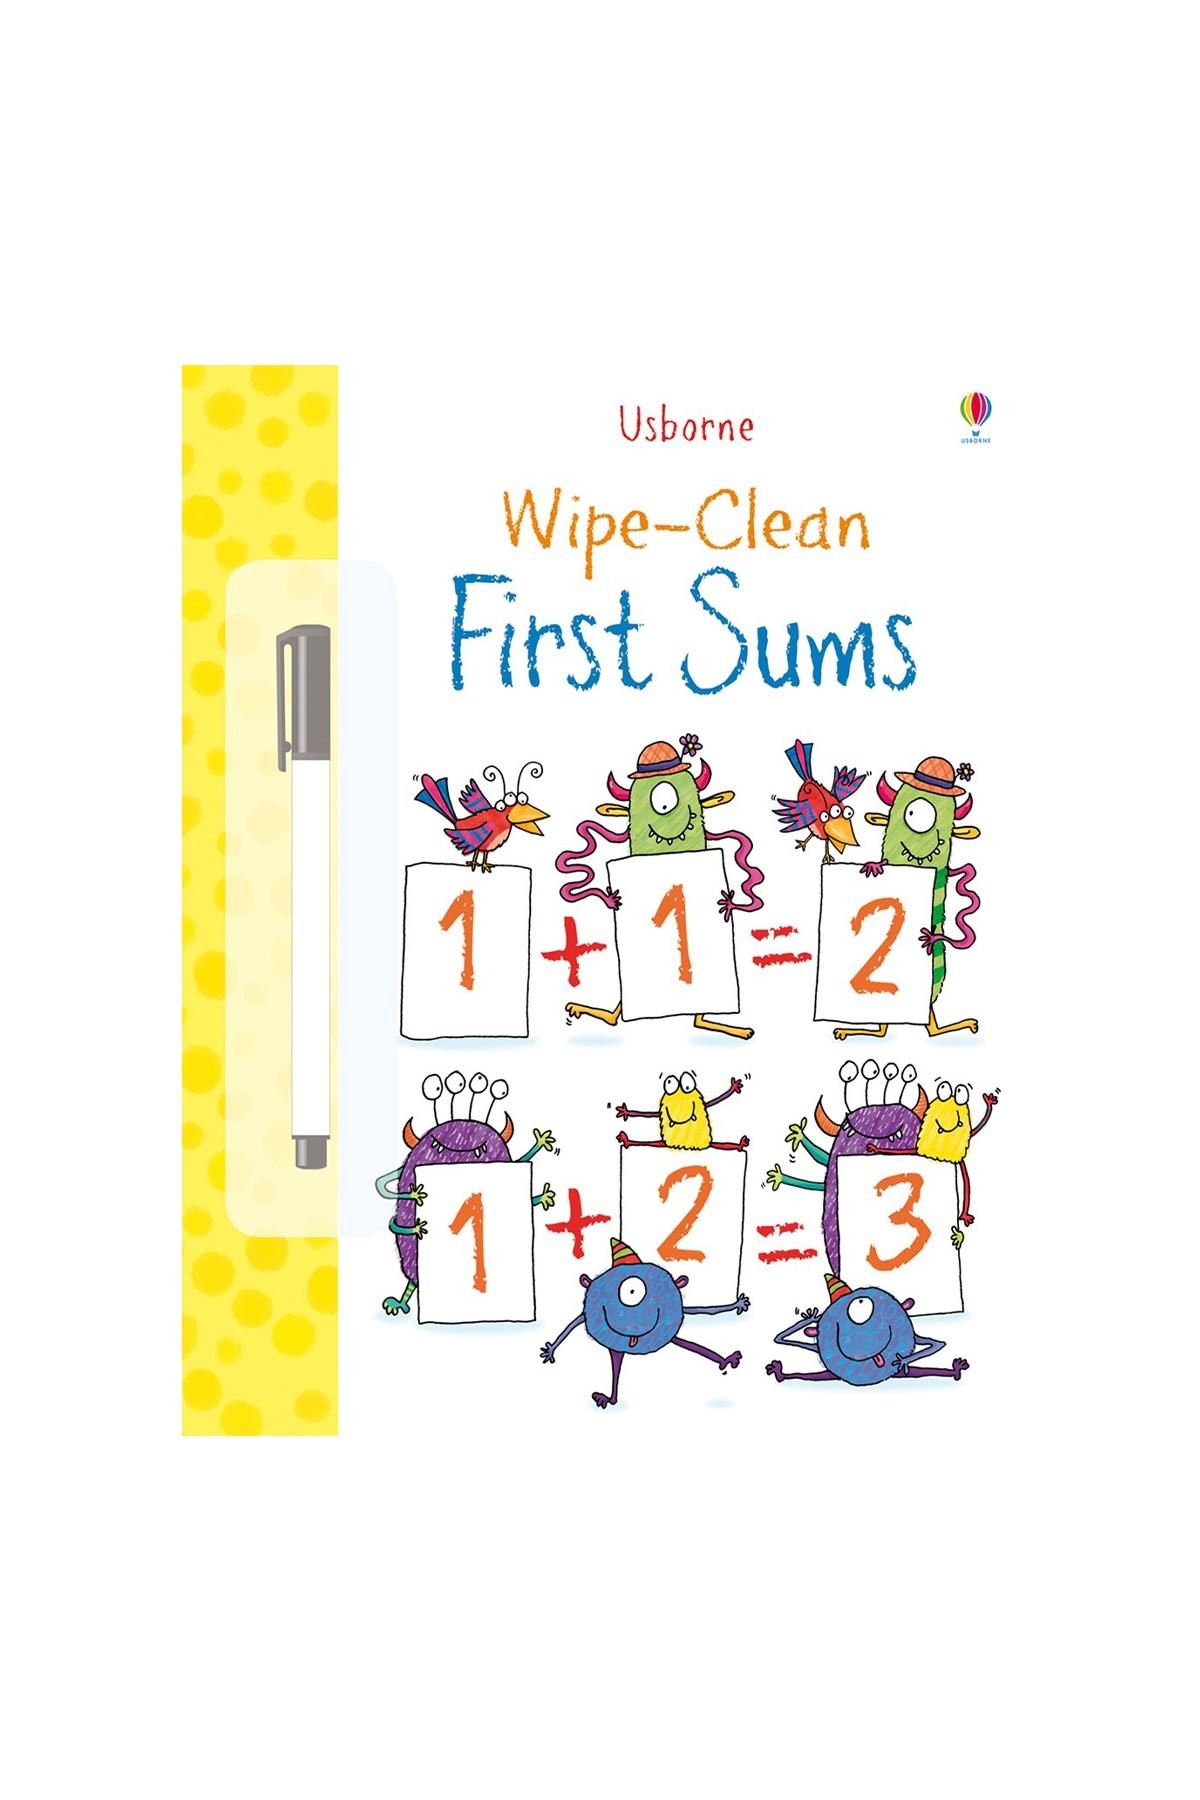 The Usborne - Wipe Clean First Sums